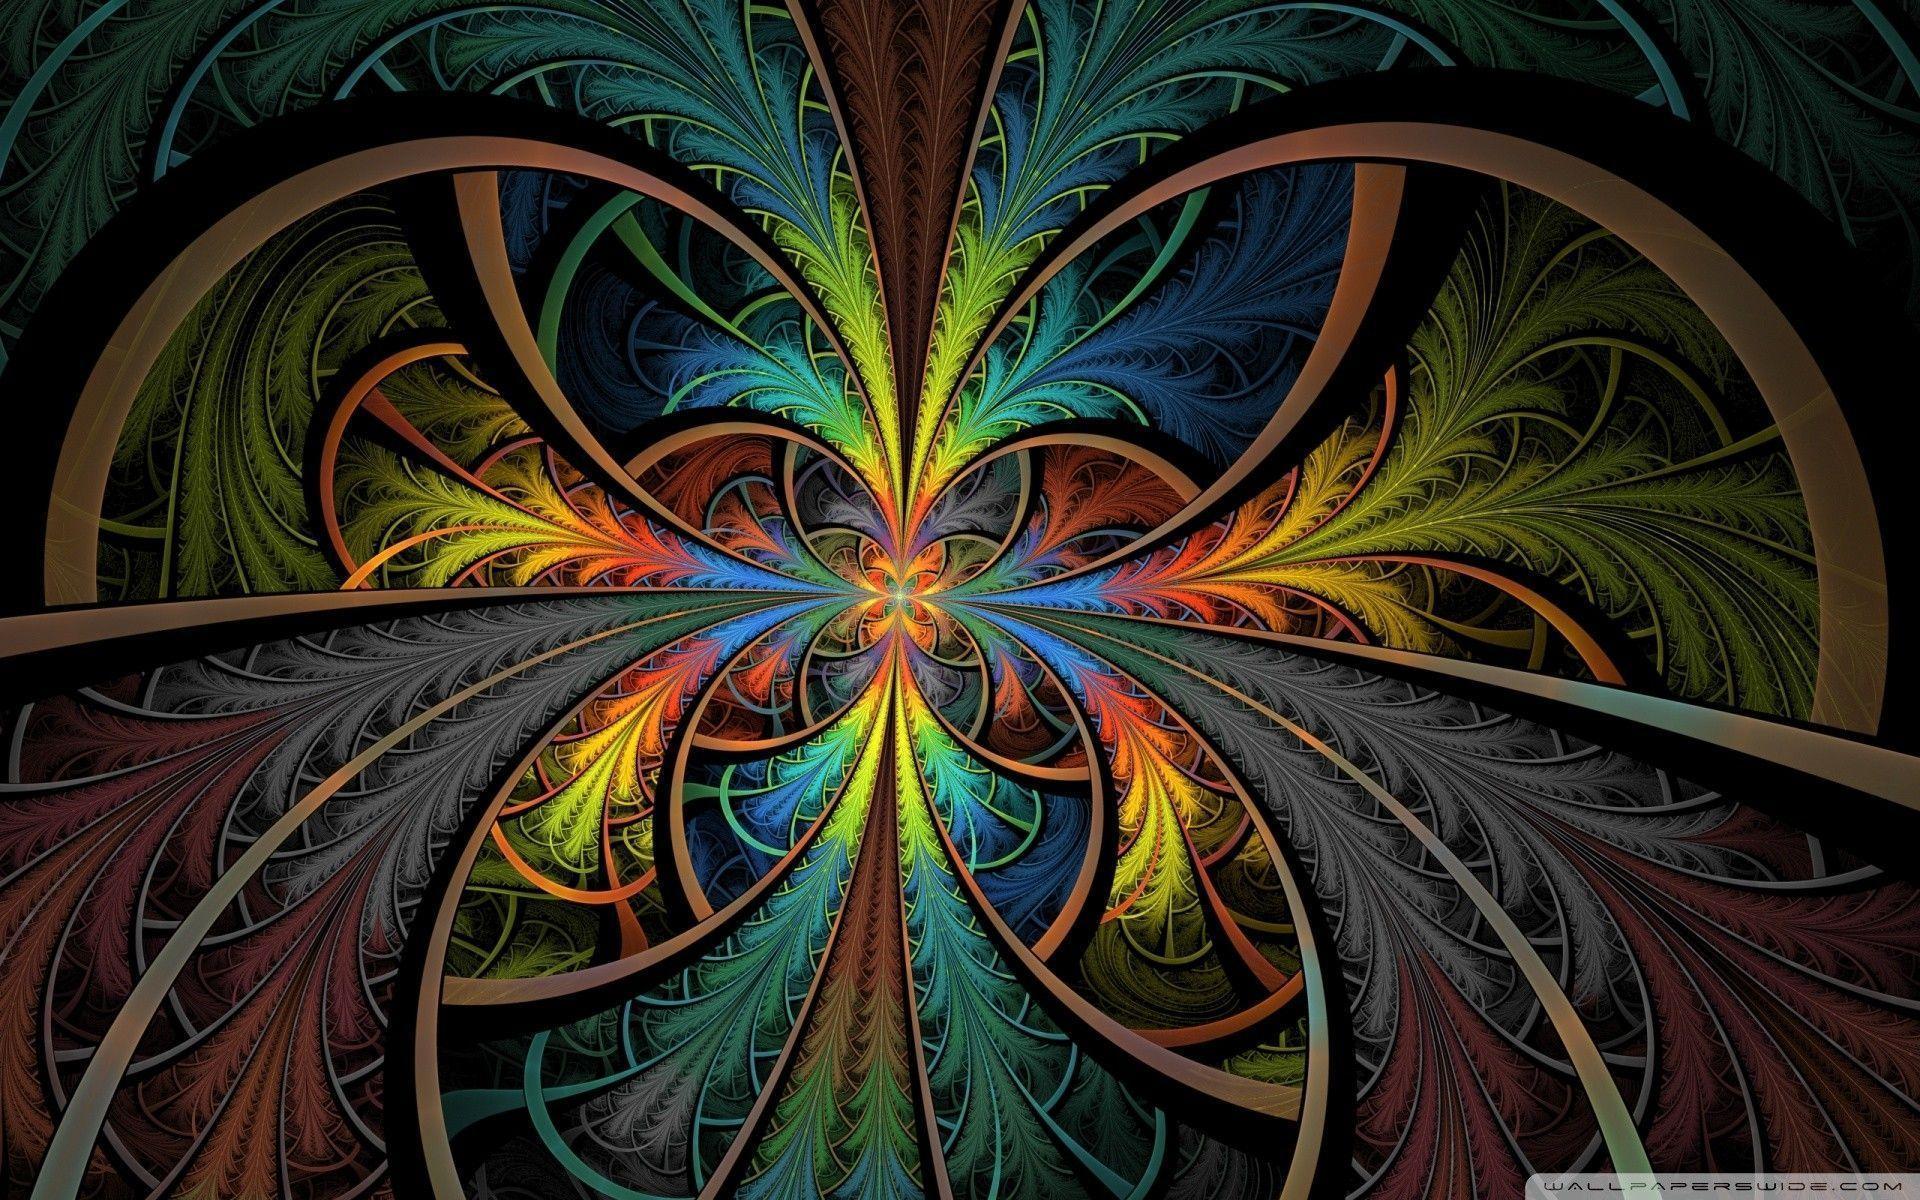 Trippy High Quality Wallpapers Hd - Desktop Background Stained Glass - HD Wallpaper 